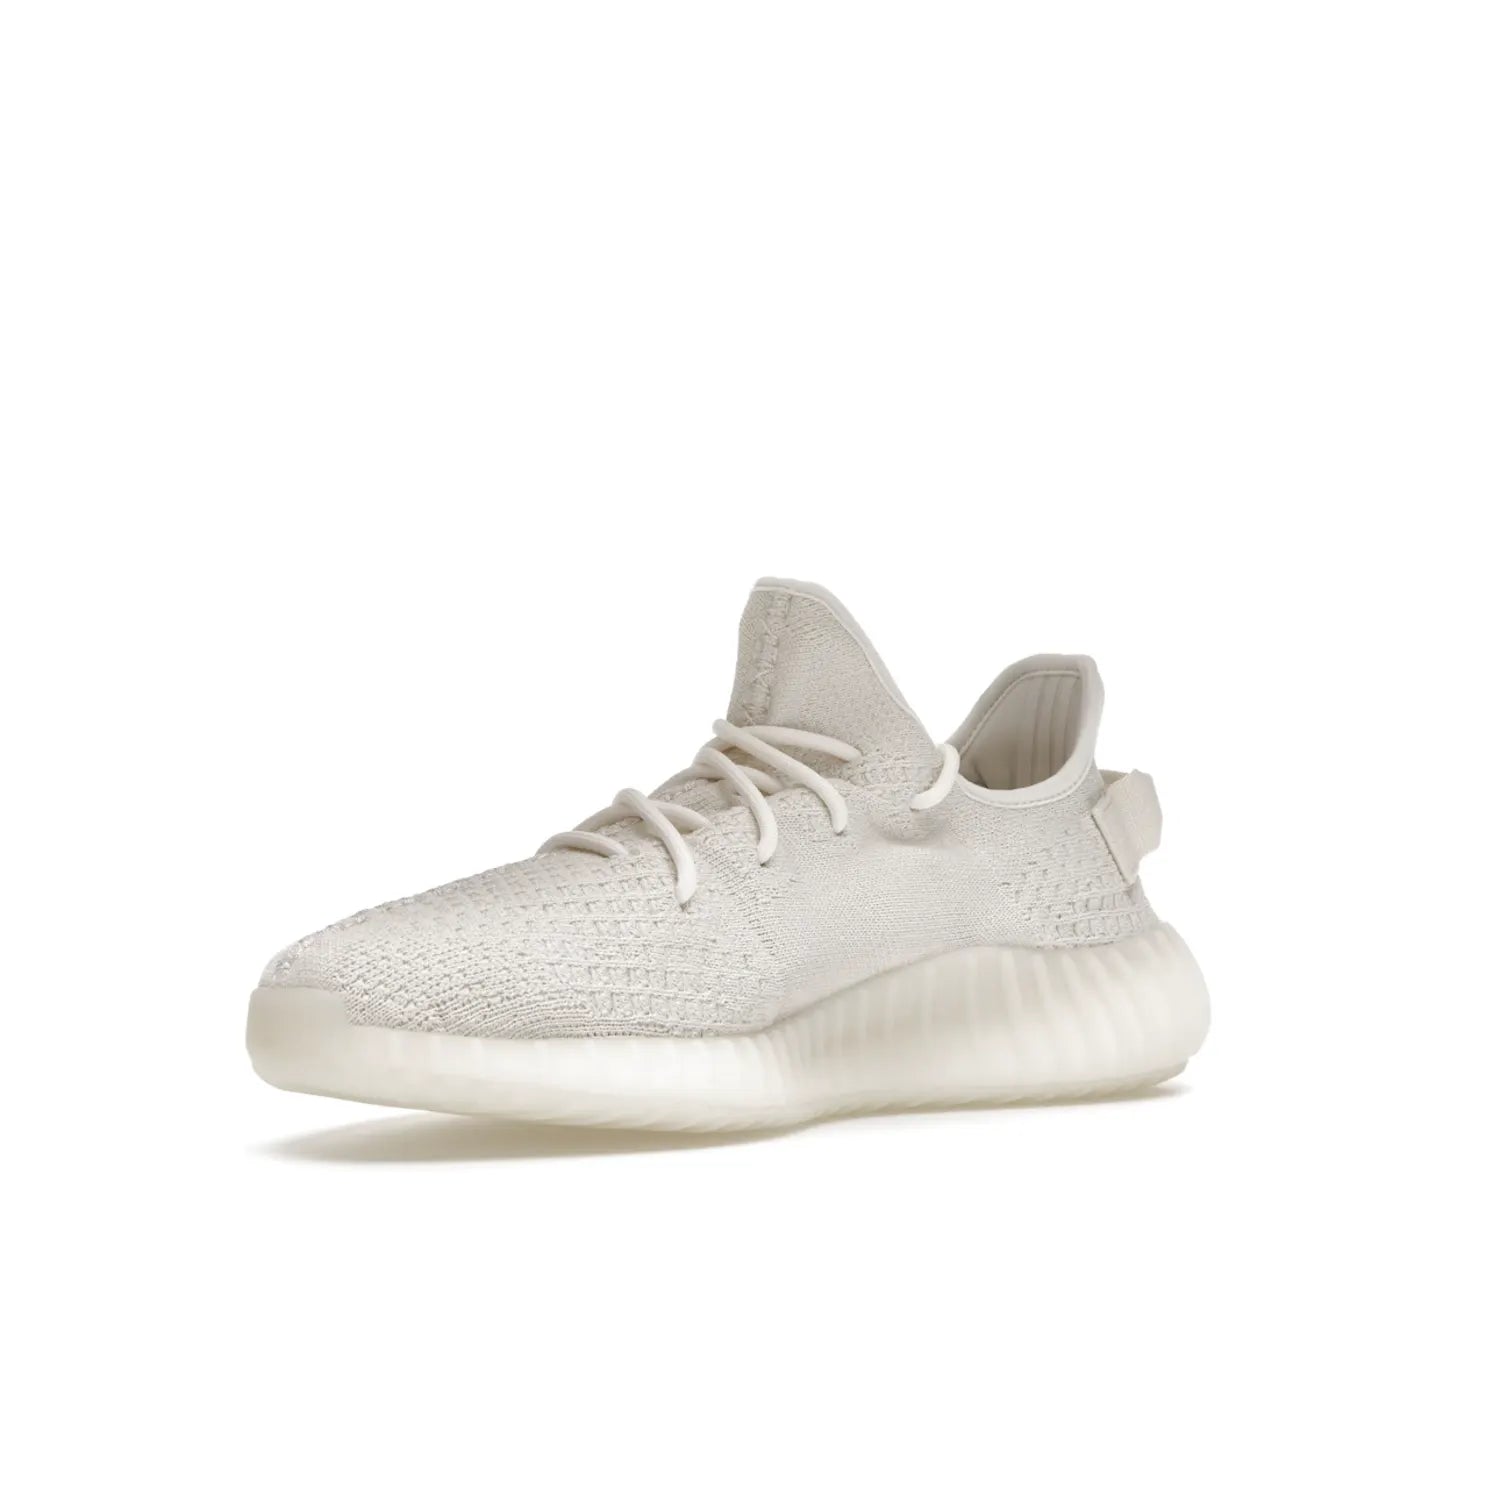 adidas Yeezy Boost 350 V2 Bone - Image 15 - Only at www.BallersClubKickz.com - Grab the stylish and comfortable adidas Yeezy Boost 350 V2 Bone in March 2022. This sneaker features a triple white Primeknit upper, mesh side stripes and canvas heel tabs, sitting atop a semi-translucent sole with Boost technology. Sure to keep your feet comfortable and stylish!